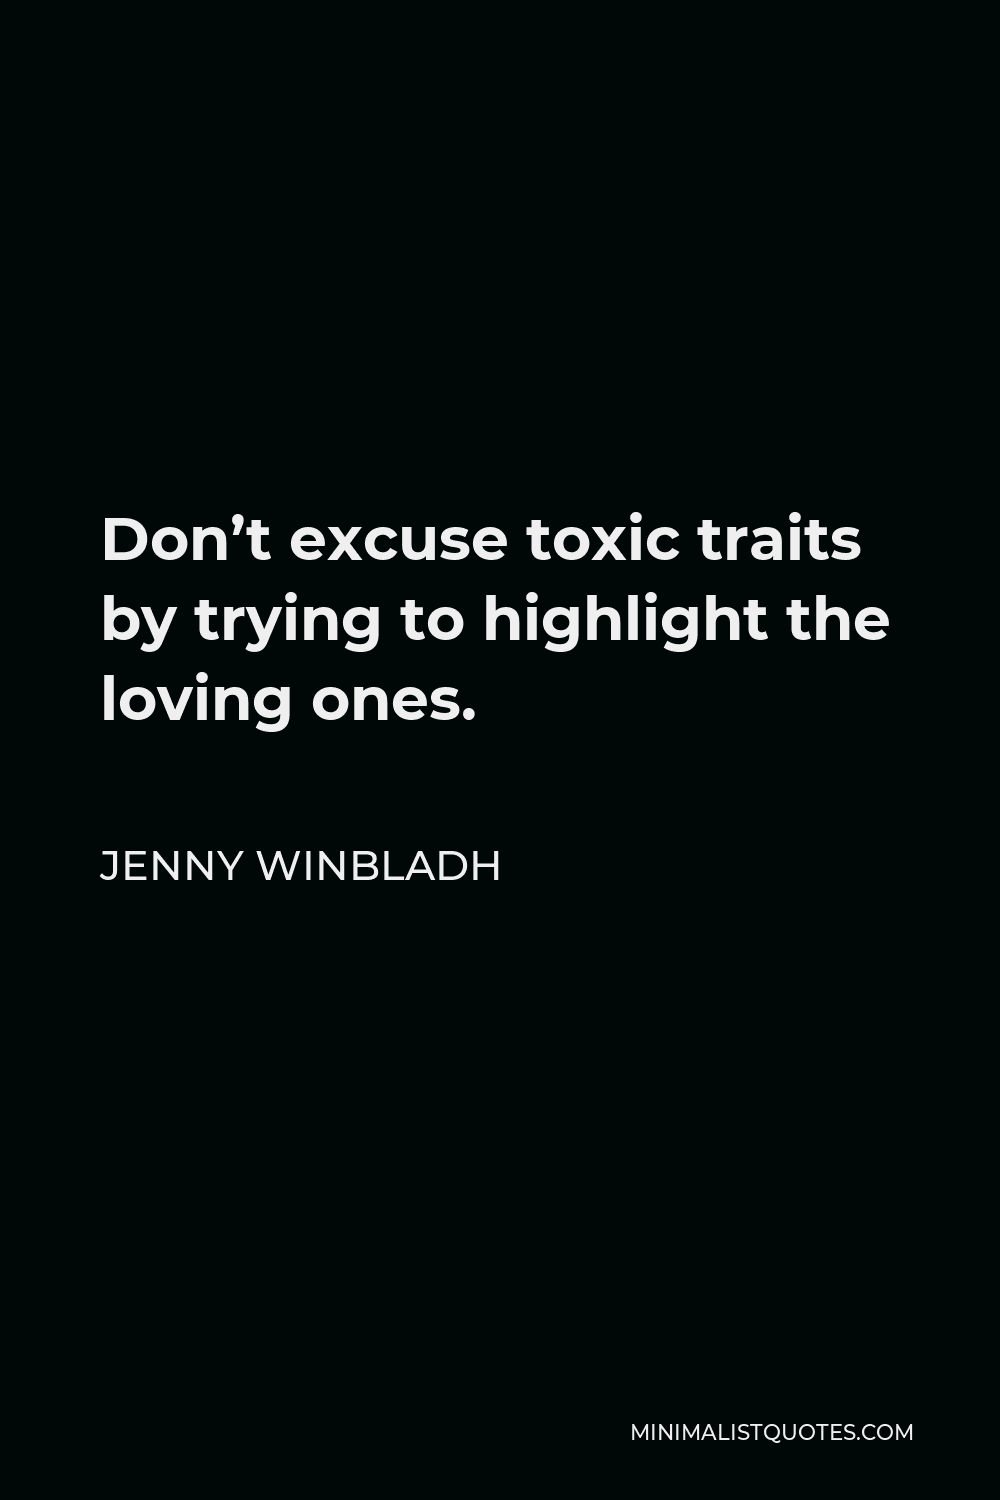 Jenny Winbladh Quote - Don’t excuse toxic traits by trying to highlight the loving ones.